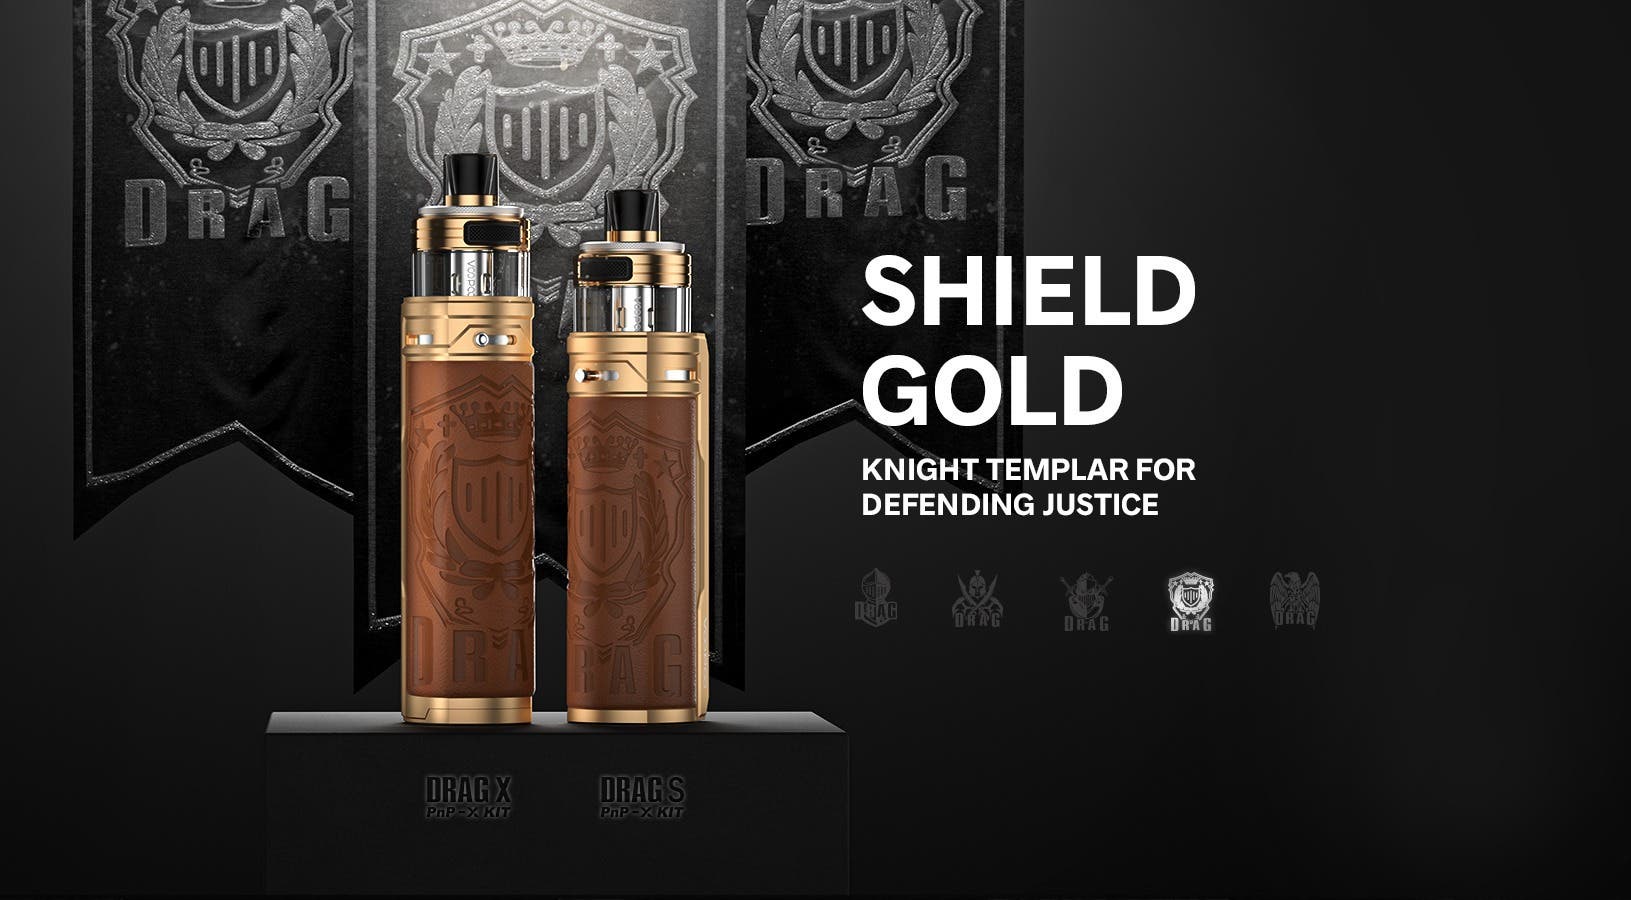 The Drag X PnP-X Pod kit is available in Shield Gold.